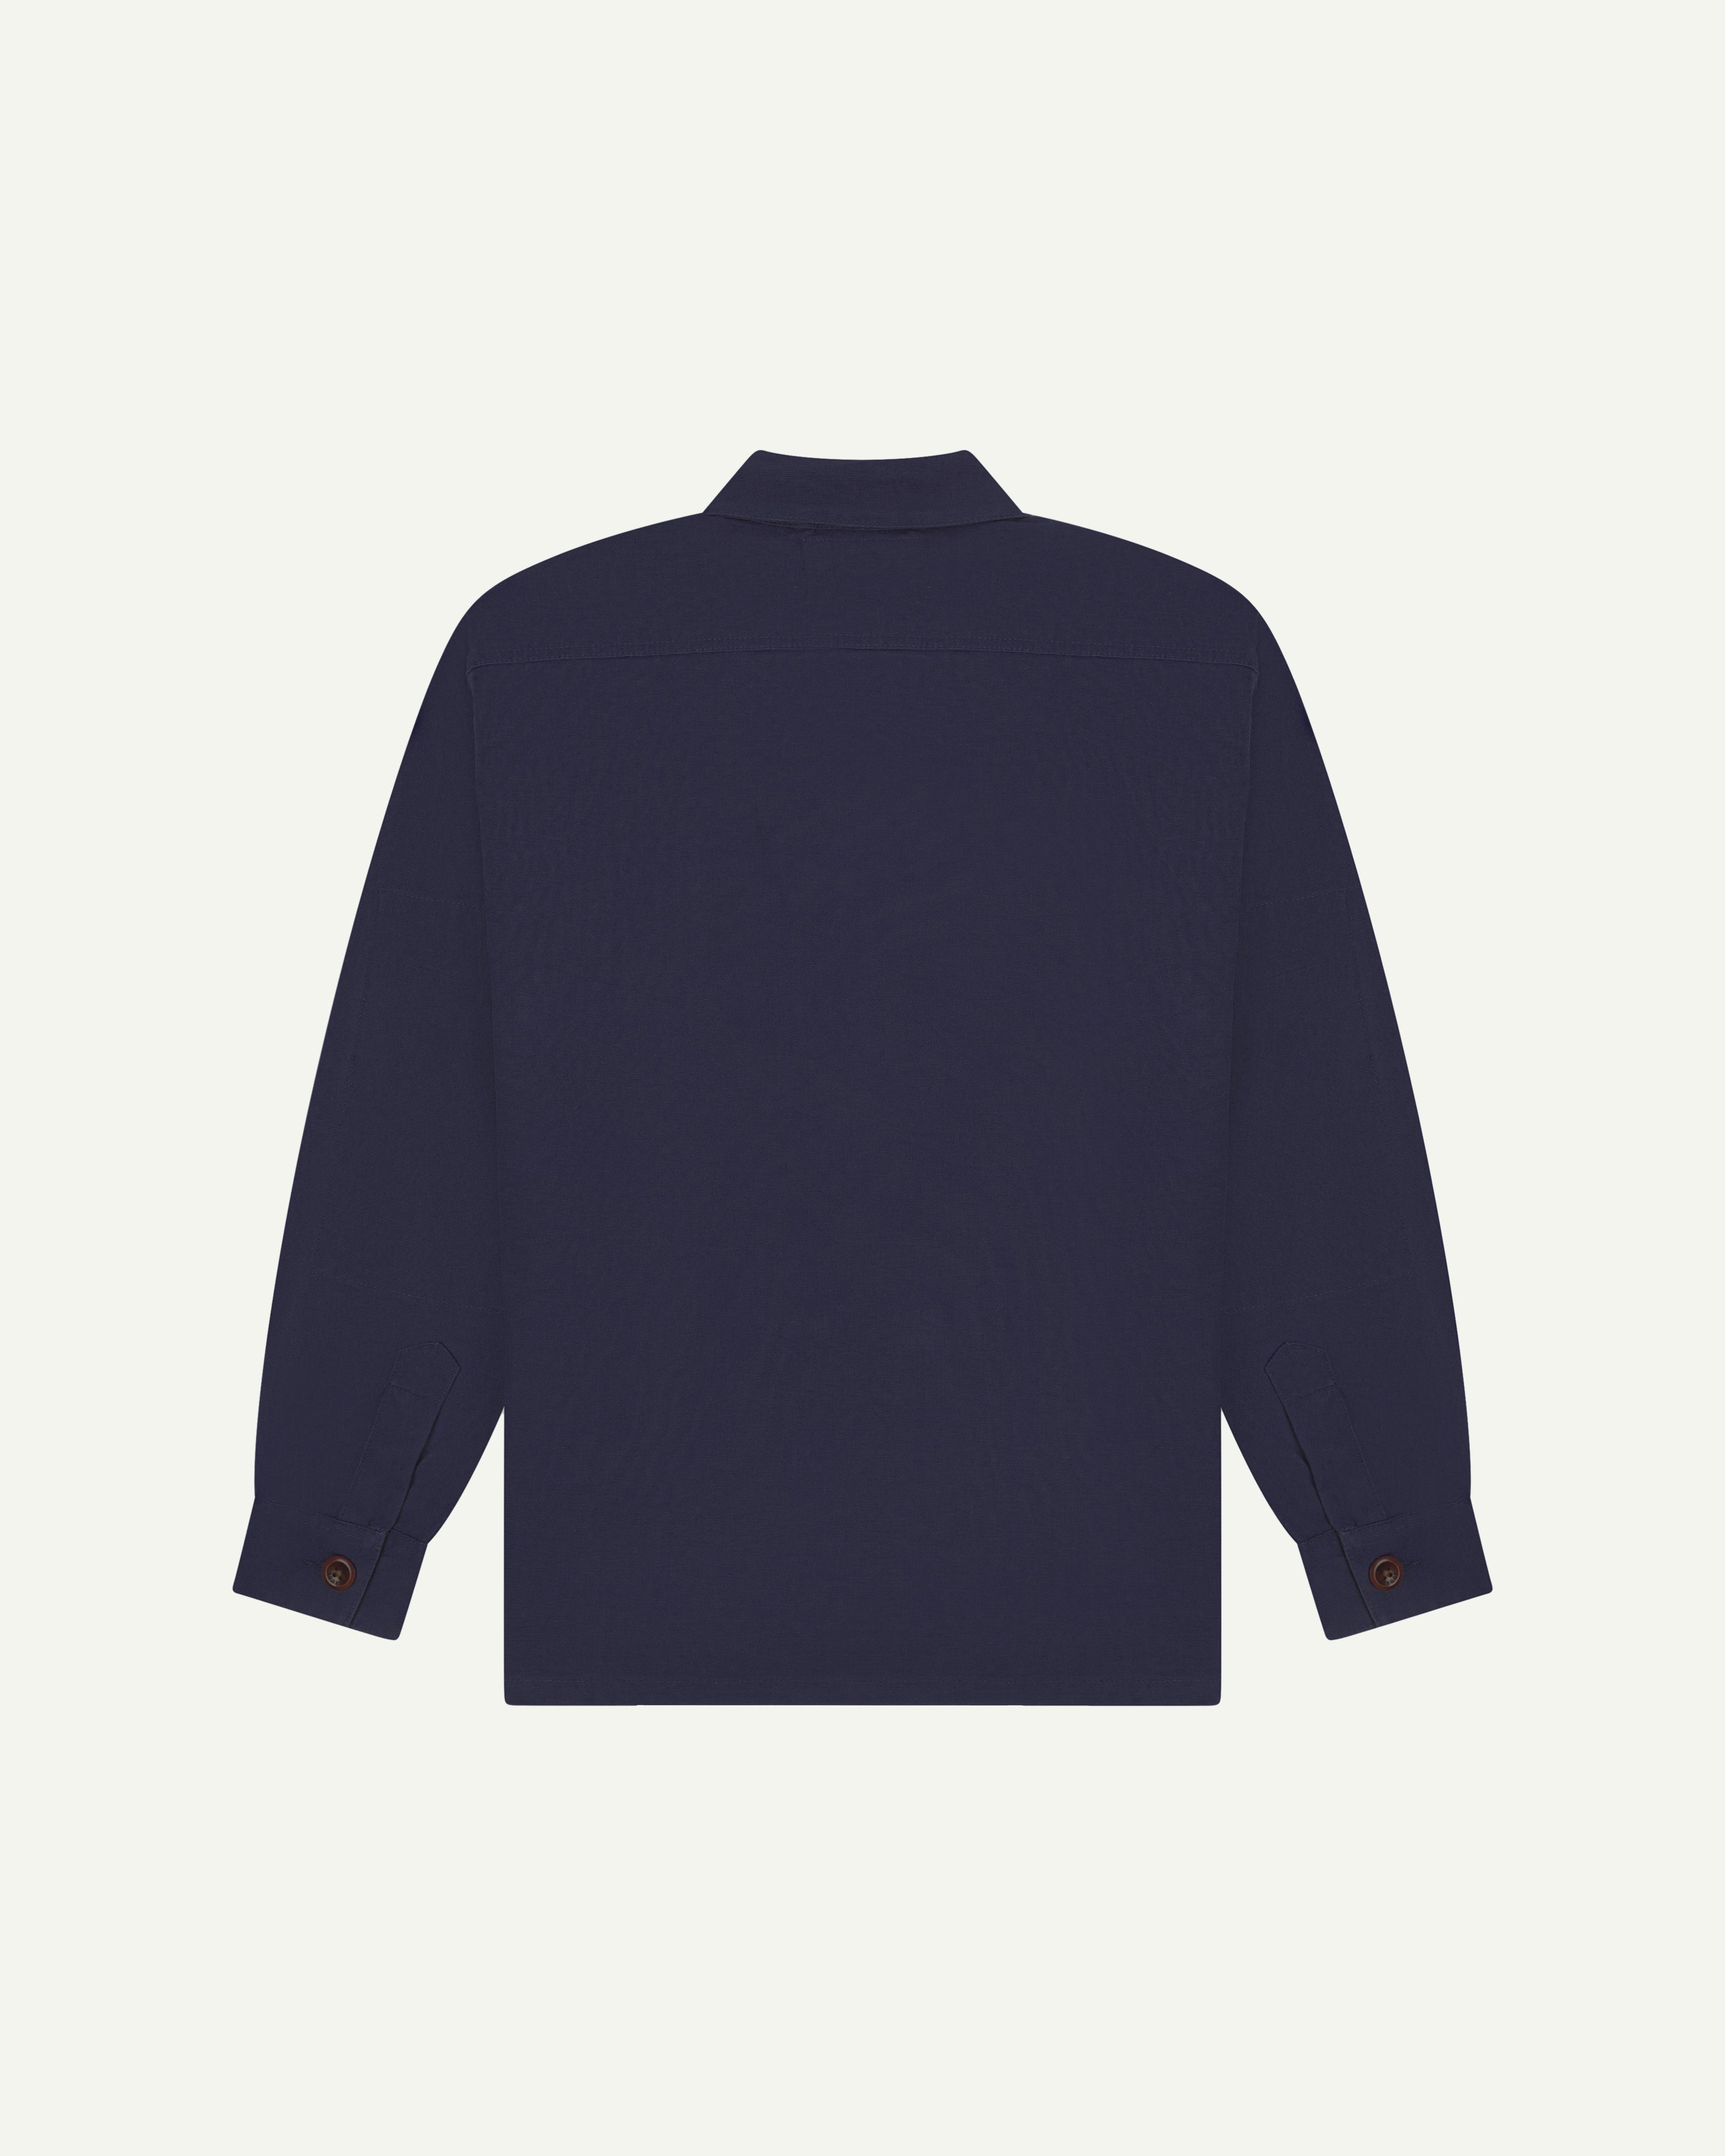 Back view flat shot of dark blue #3003 men's organic cotton workshirt from Uskees. 